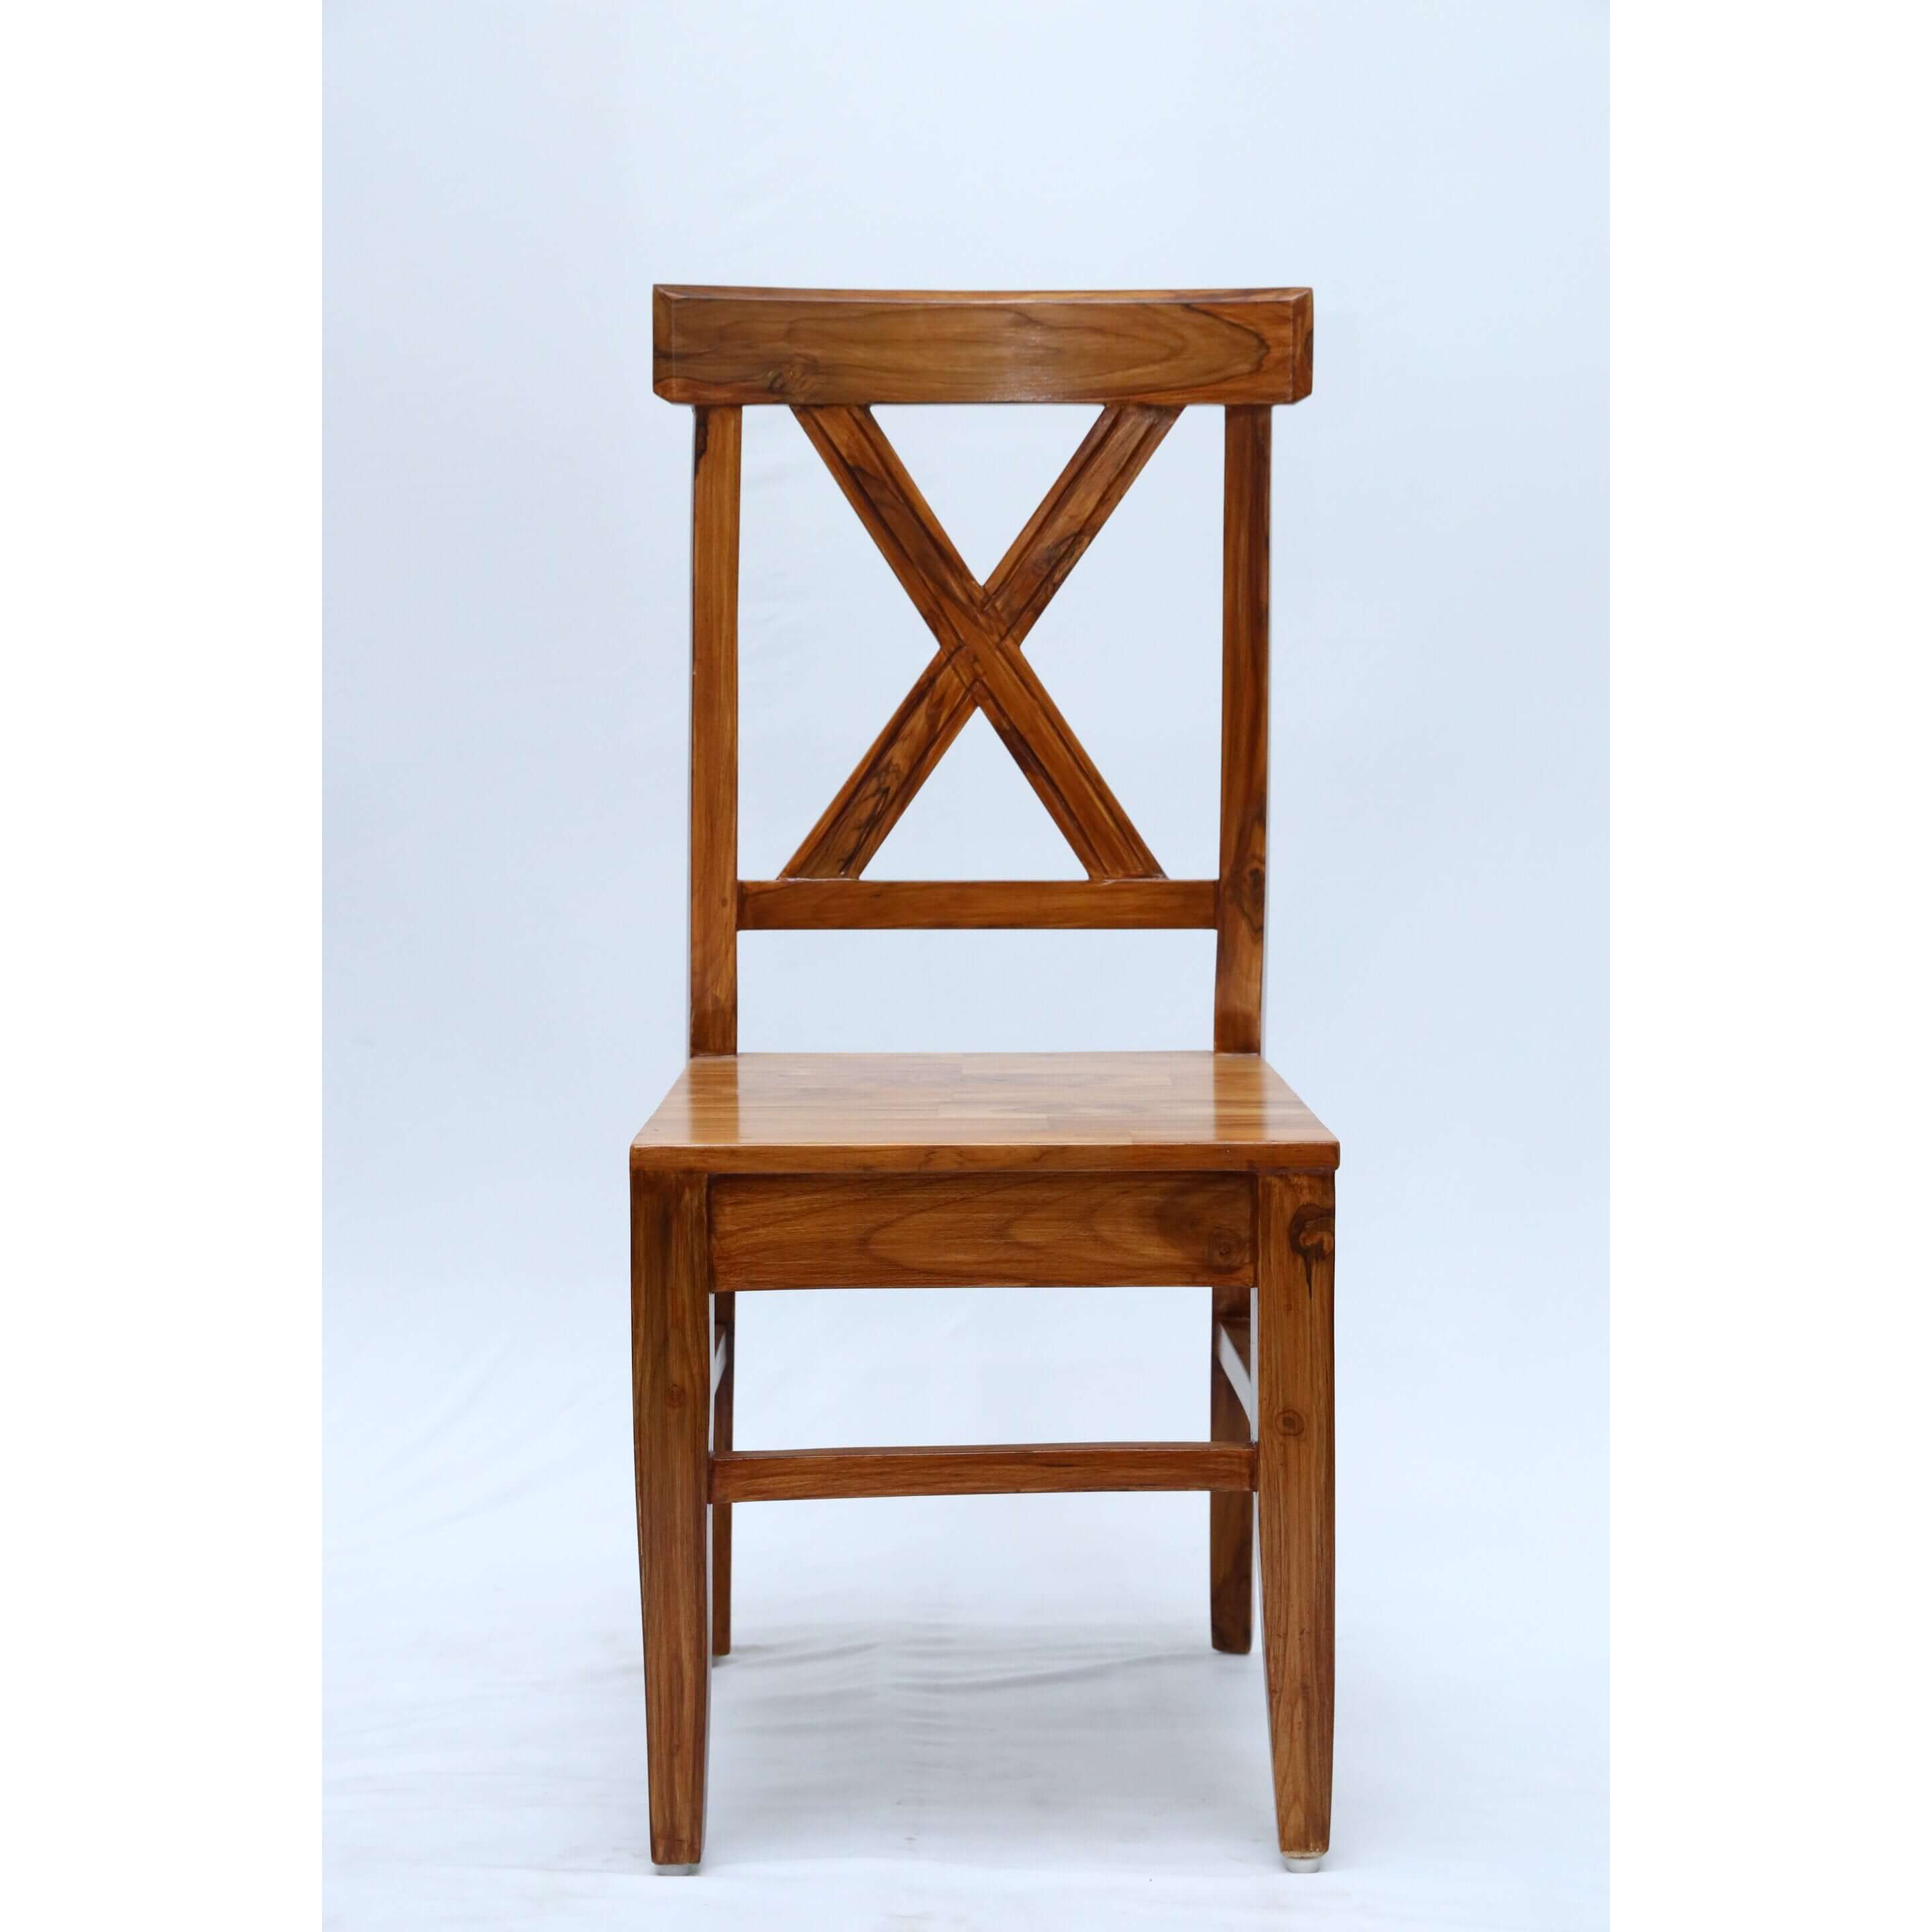 Teak wood dining chair with a X shaped backrest tch-2201